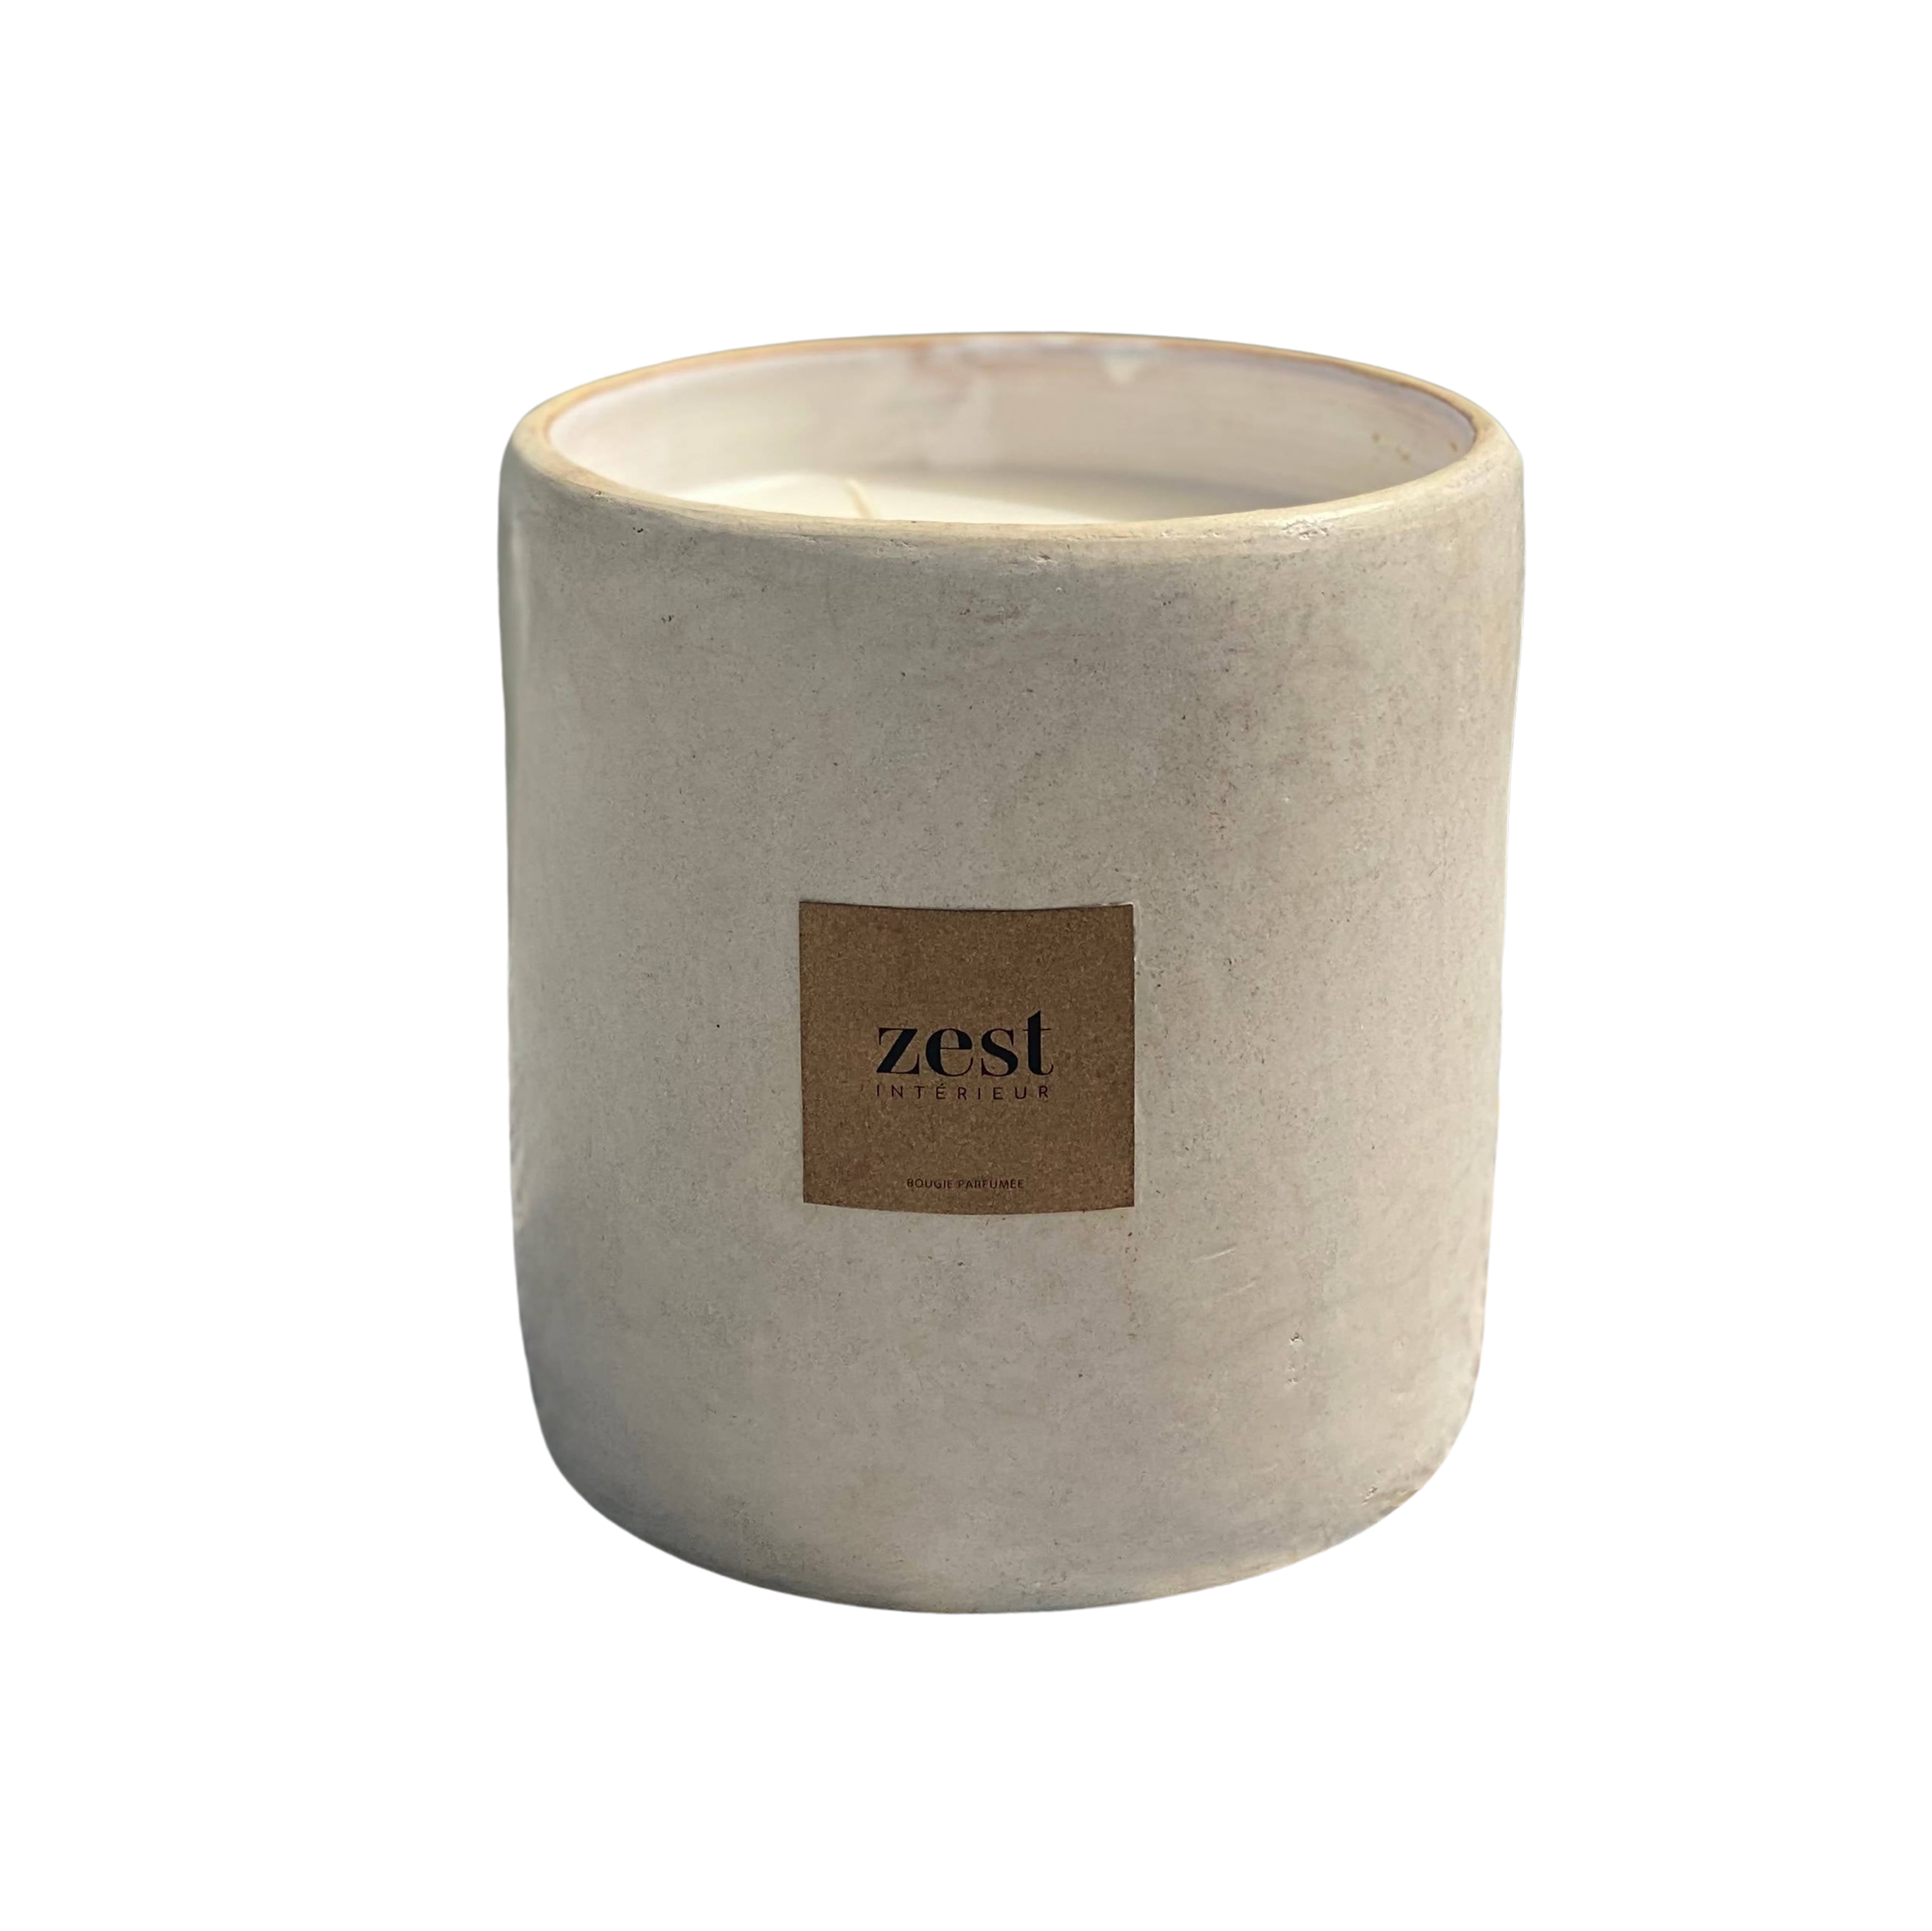 3 WICKS WHITE ORIENTAL CANDLE